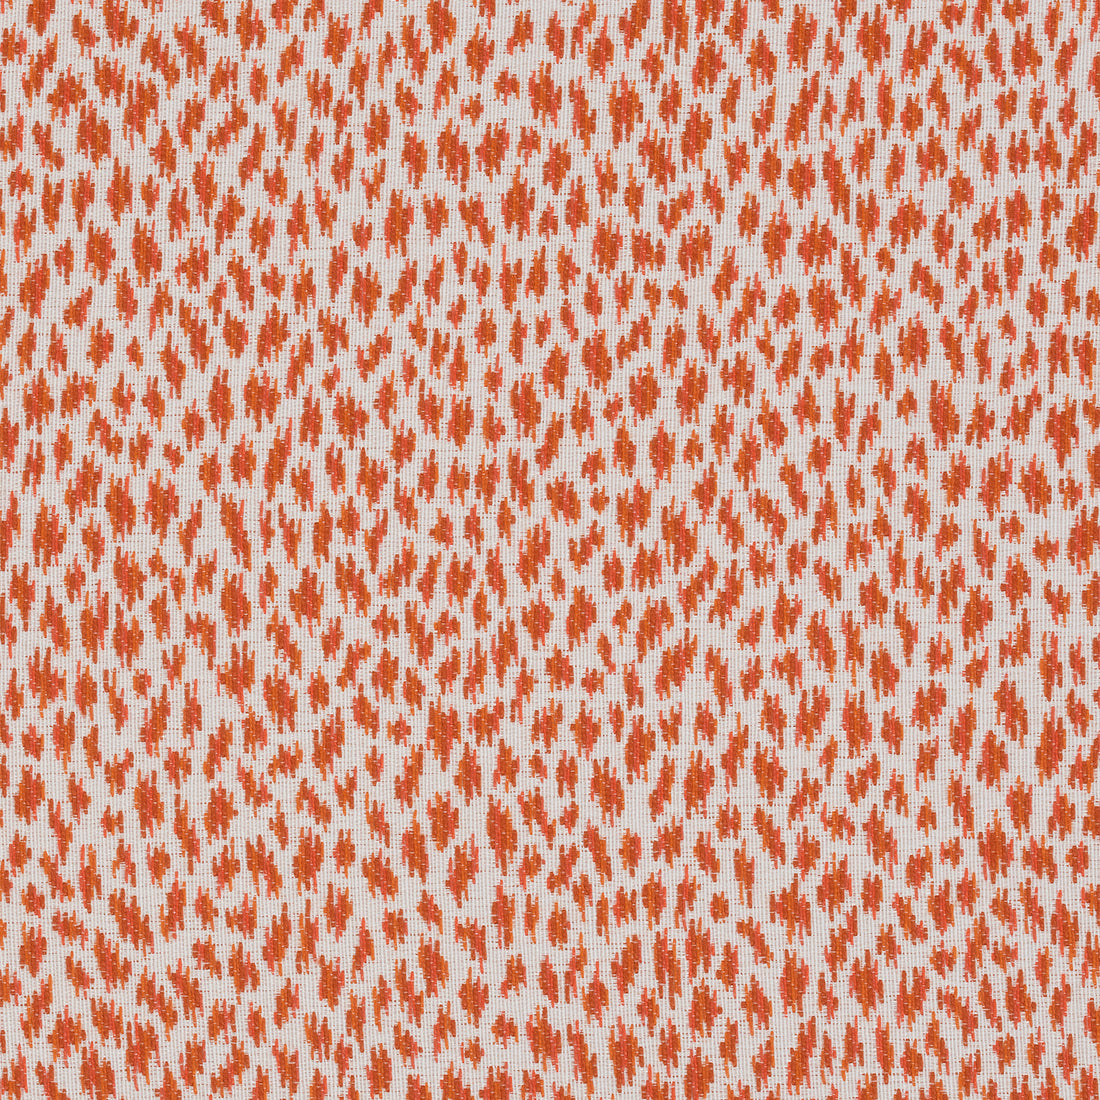 Citra fabric in coral color - pattern number W80452 - by Thibaut in the Woven Resource Vol 10 Menagerie collection